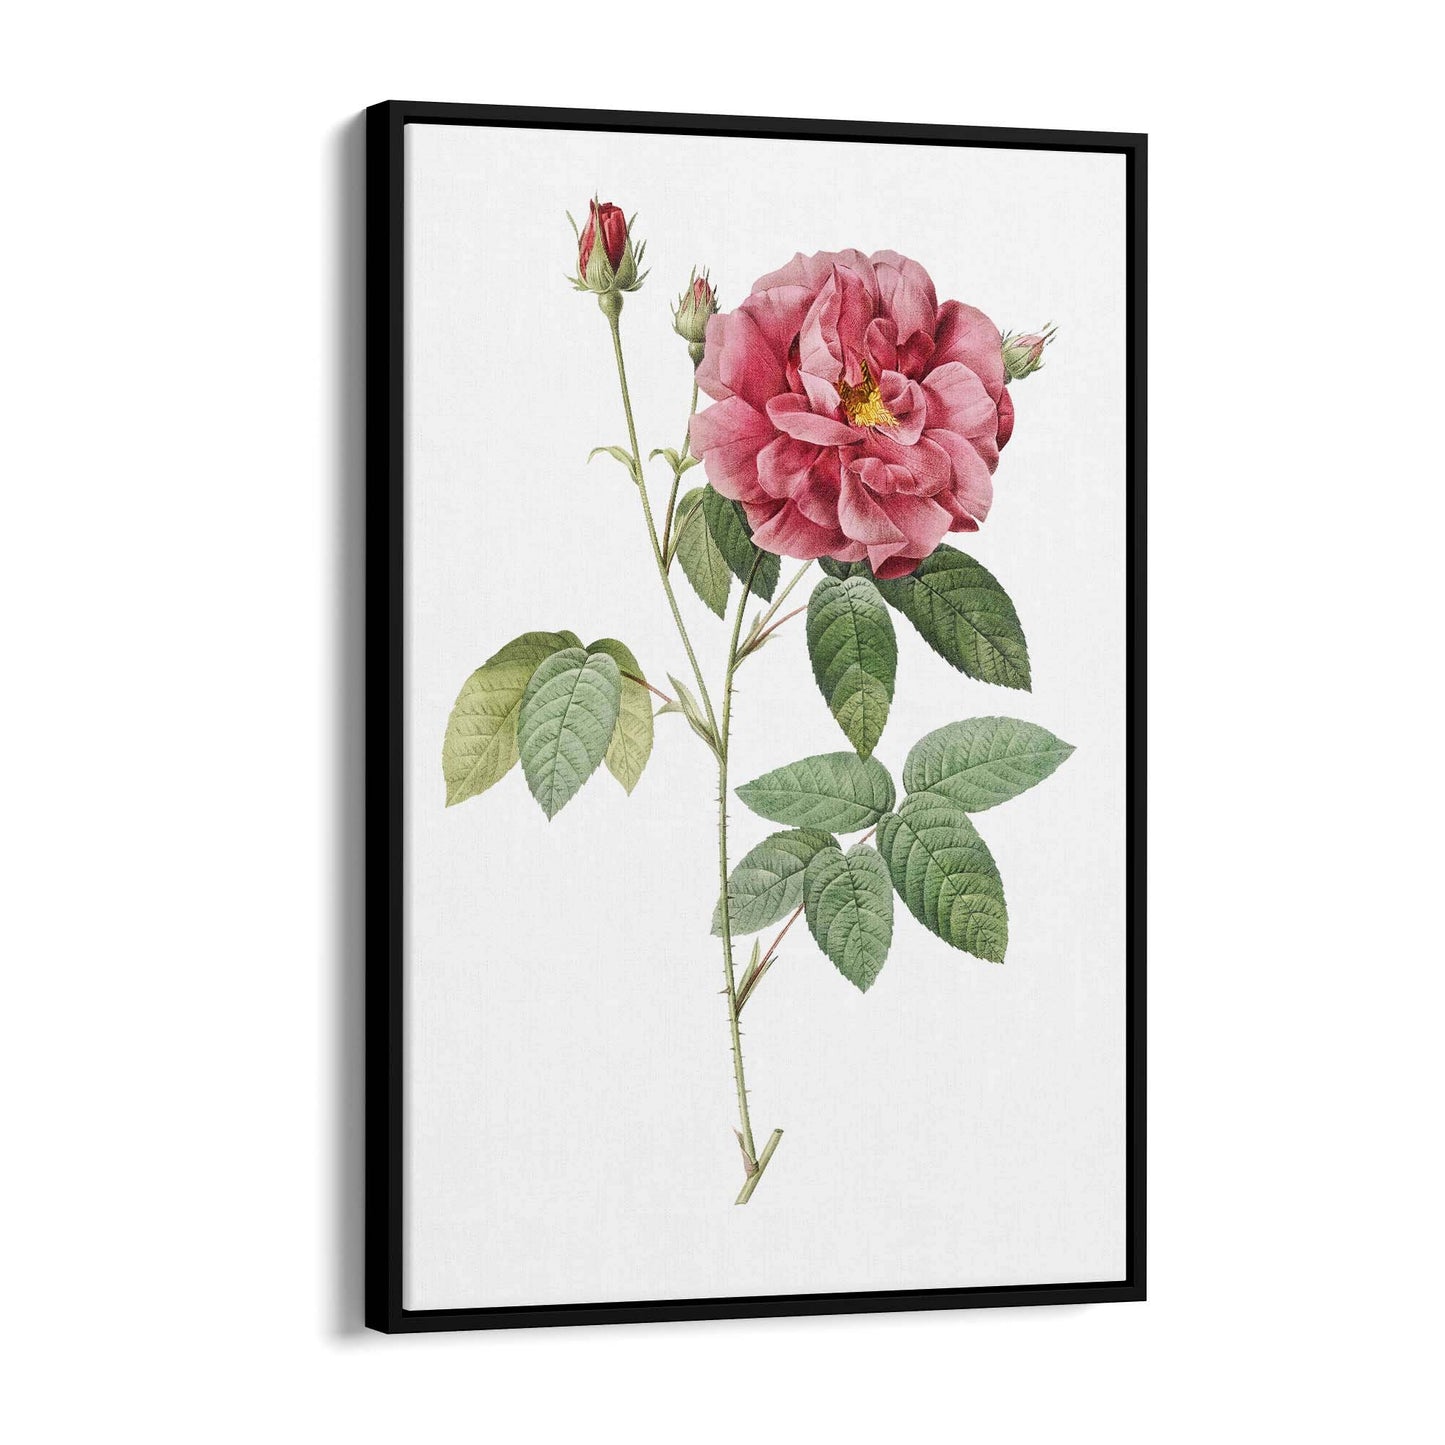 Flower Botanical Painting Kitchen Hallway Wall Art #17 - The Affordable Art Company